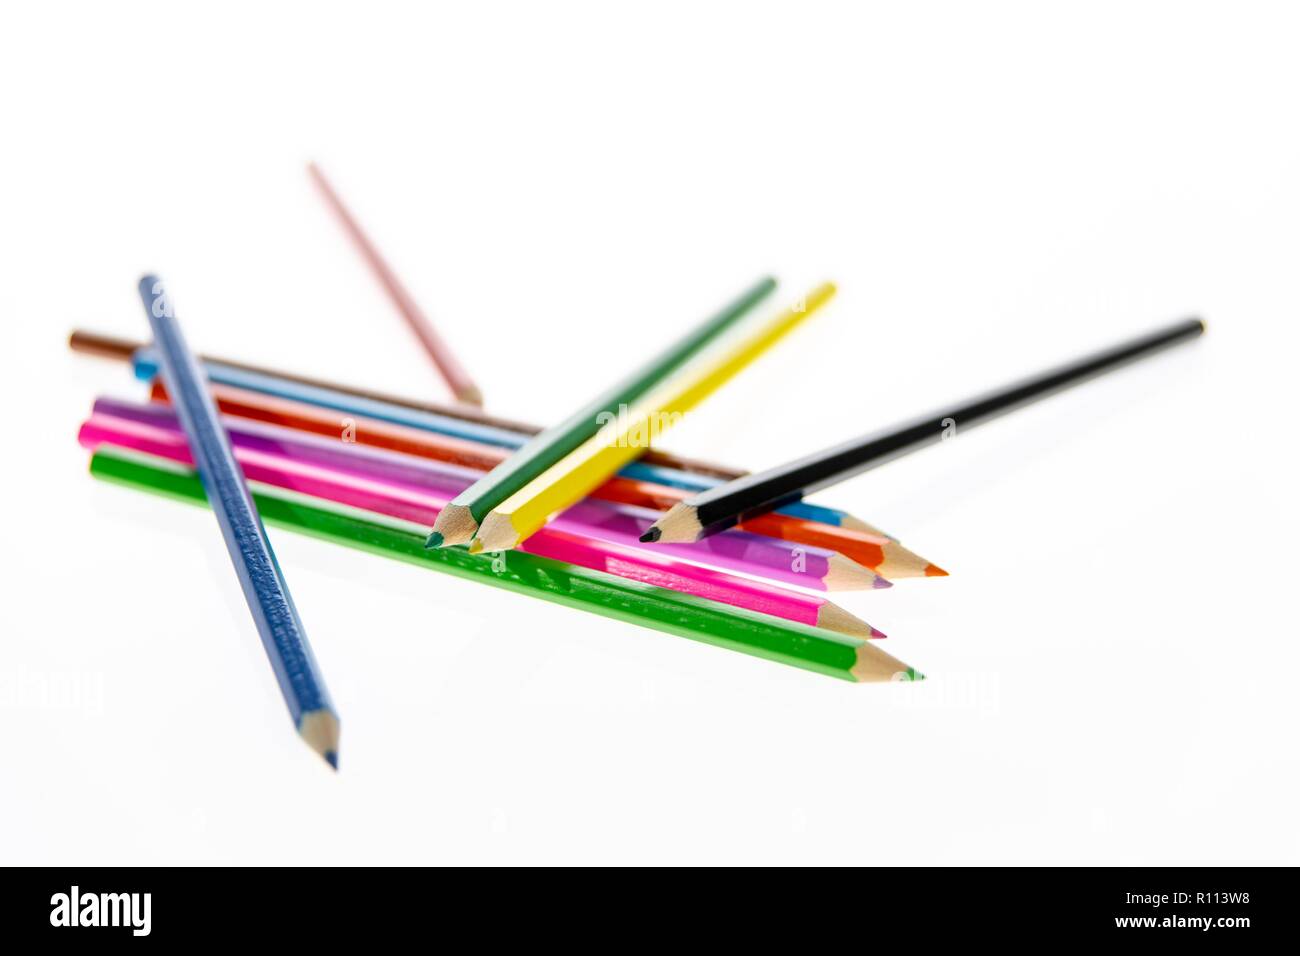 Coloured pencils randomly arranged on a white background. Colored pencil crayons.  Pencils are sharpened ready for drawing or sketching. Stock Photo